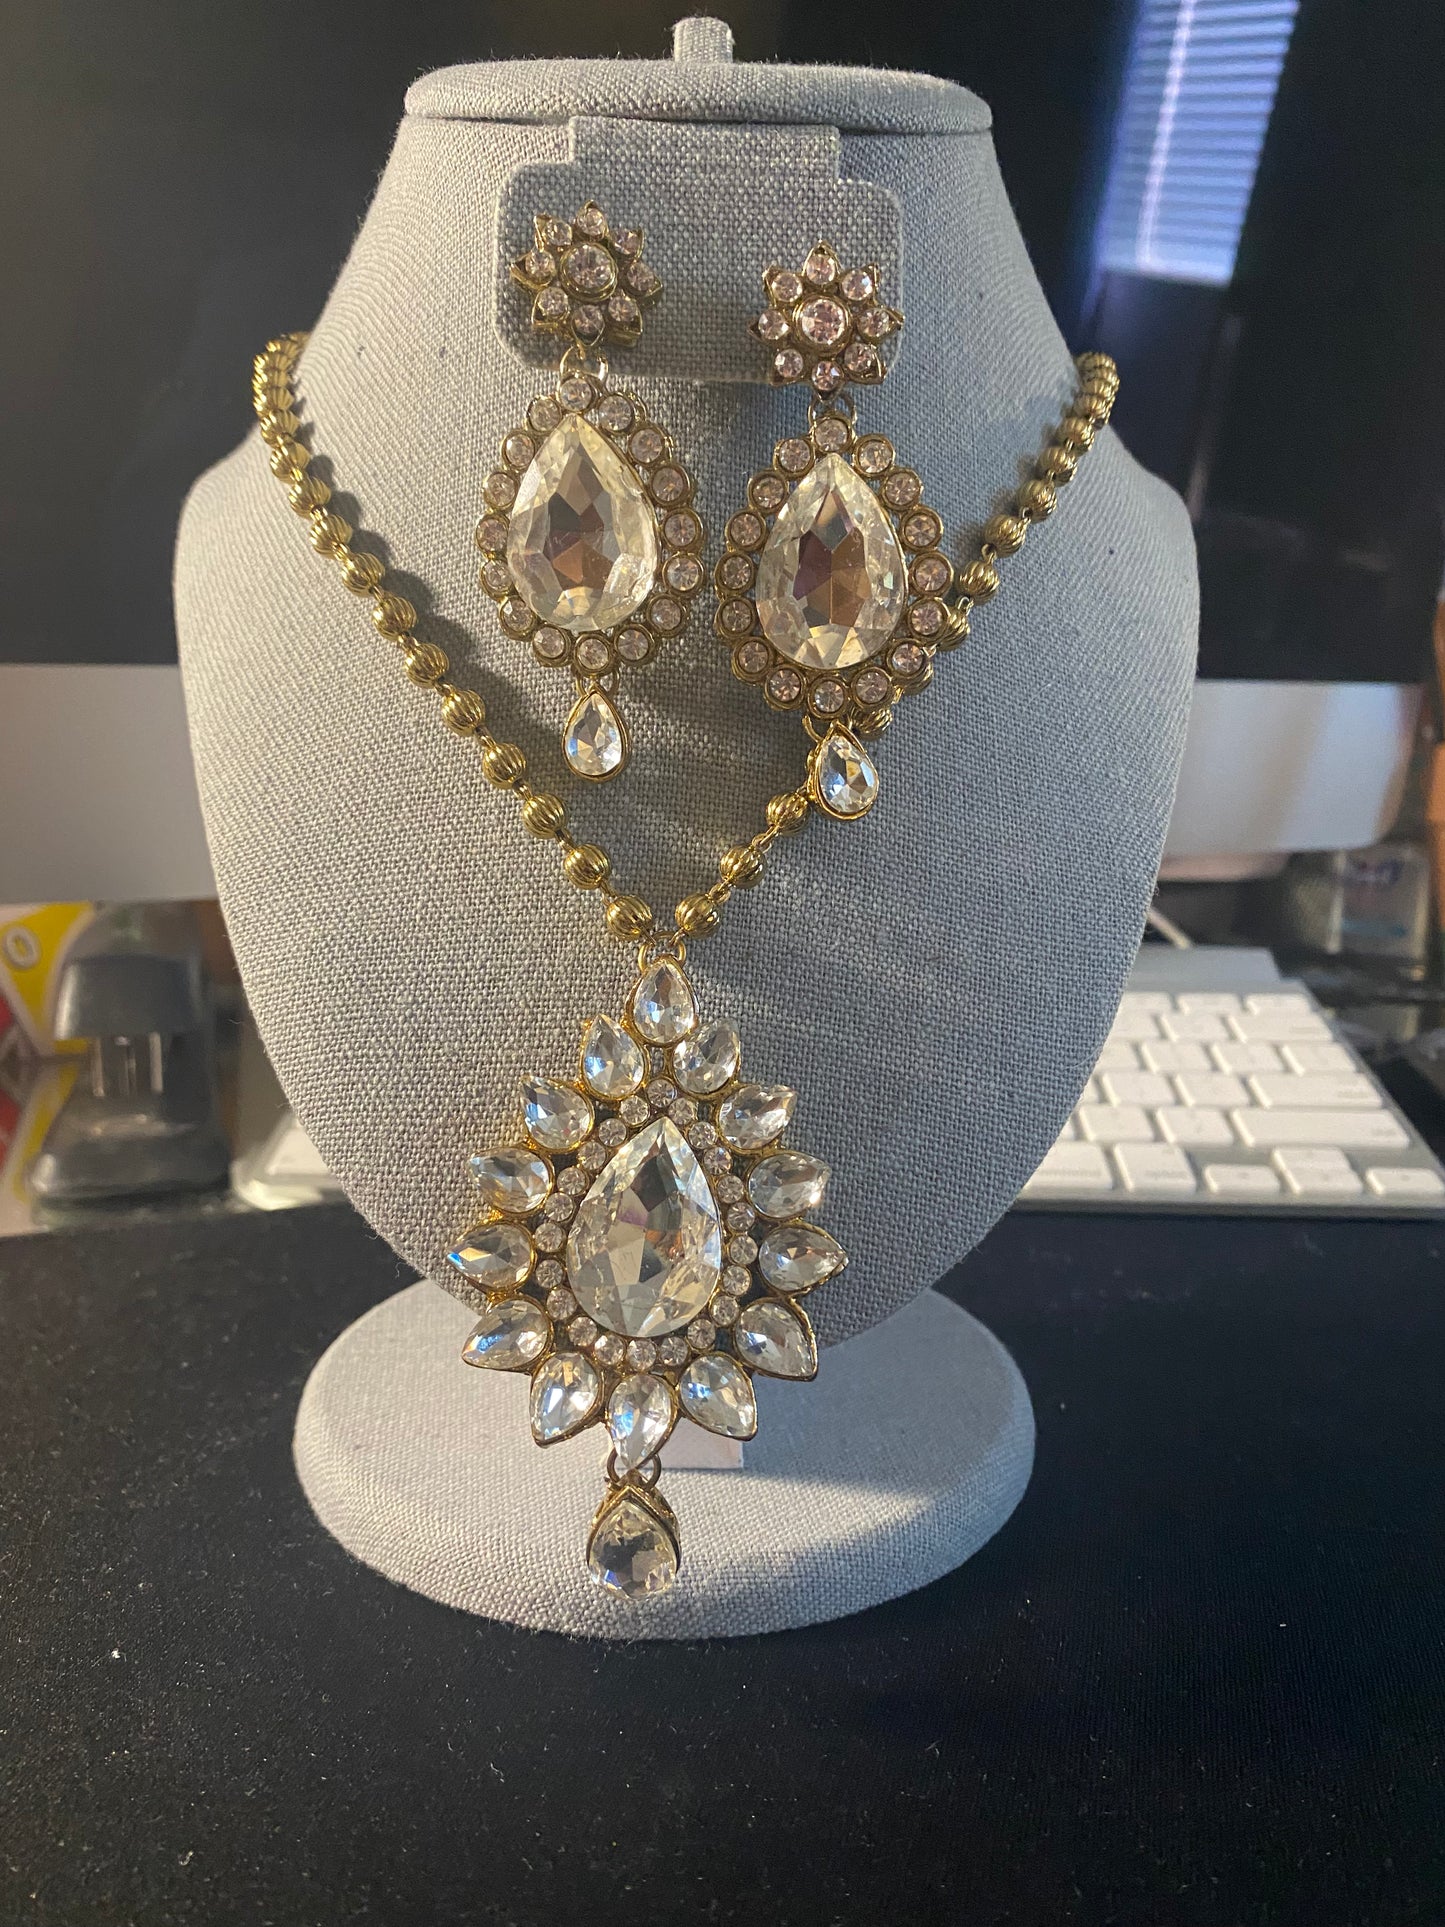 New Jewelry: Long Crystal Necklace and Earrings